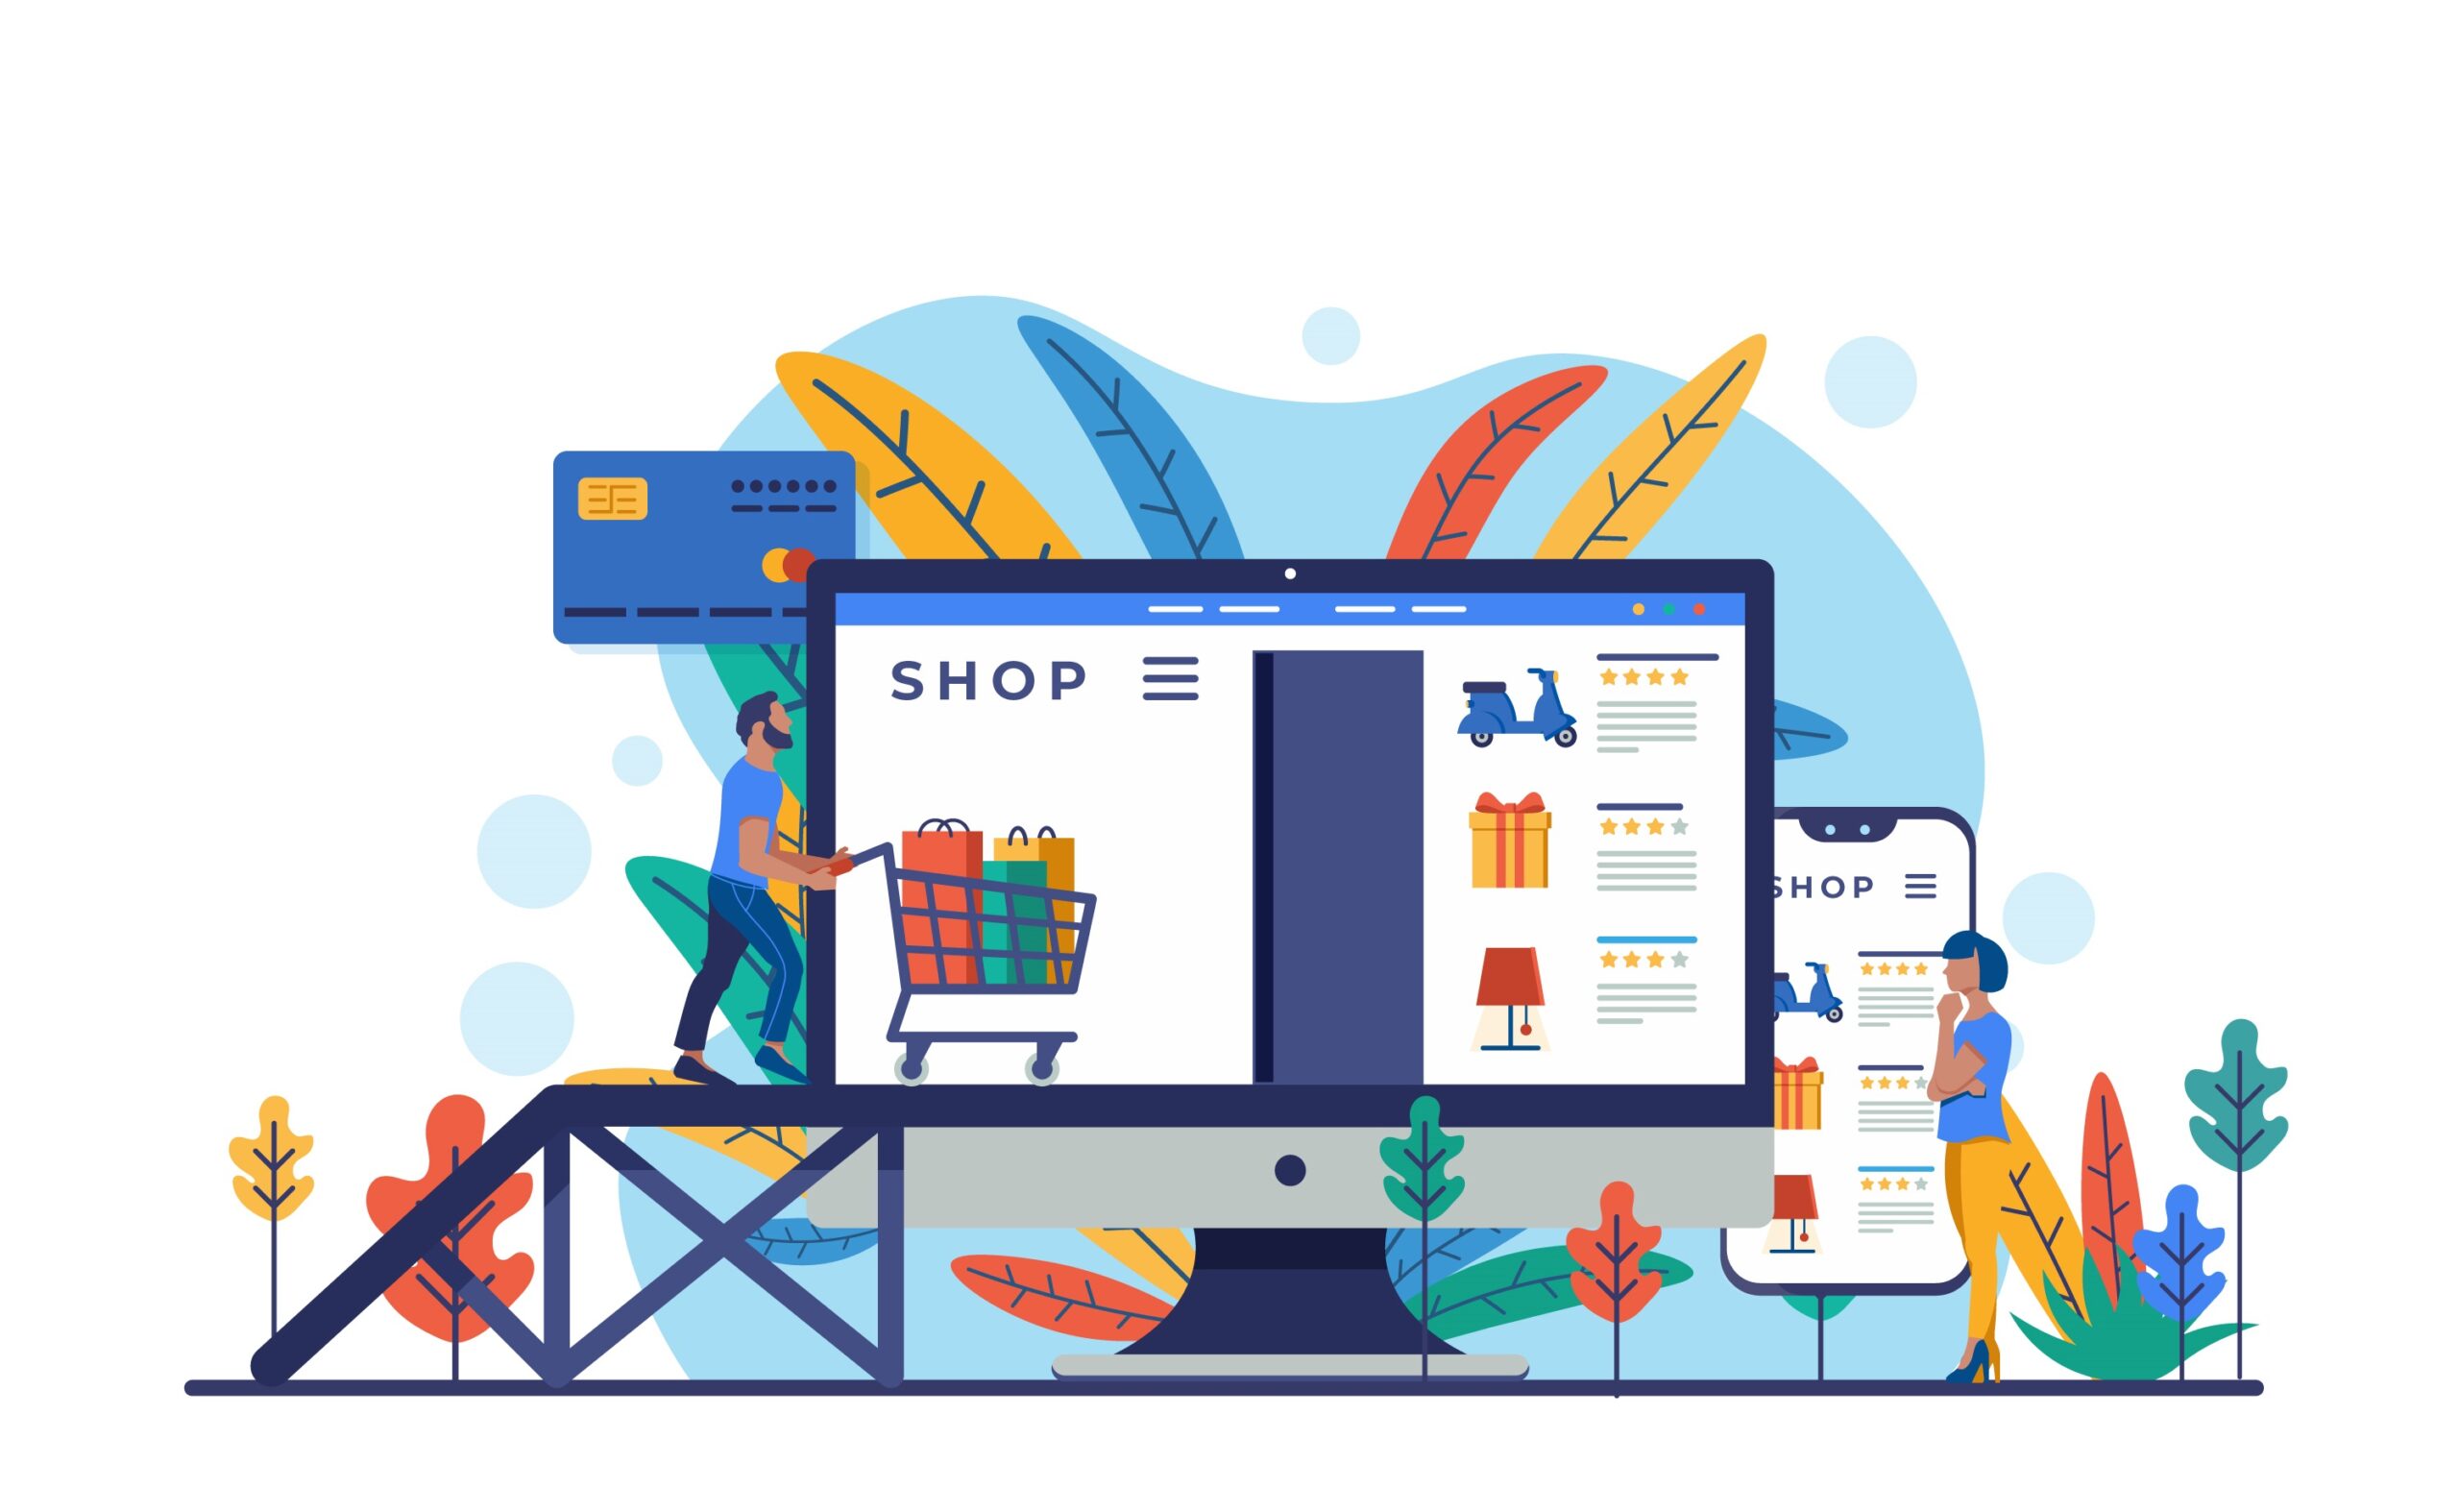 How to Find the Best Ecommerce Web Design Company for Your Business